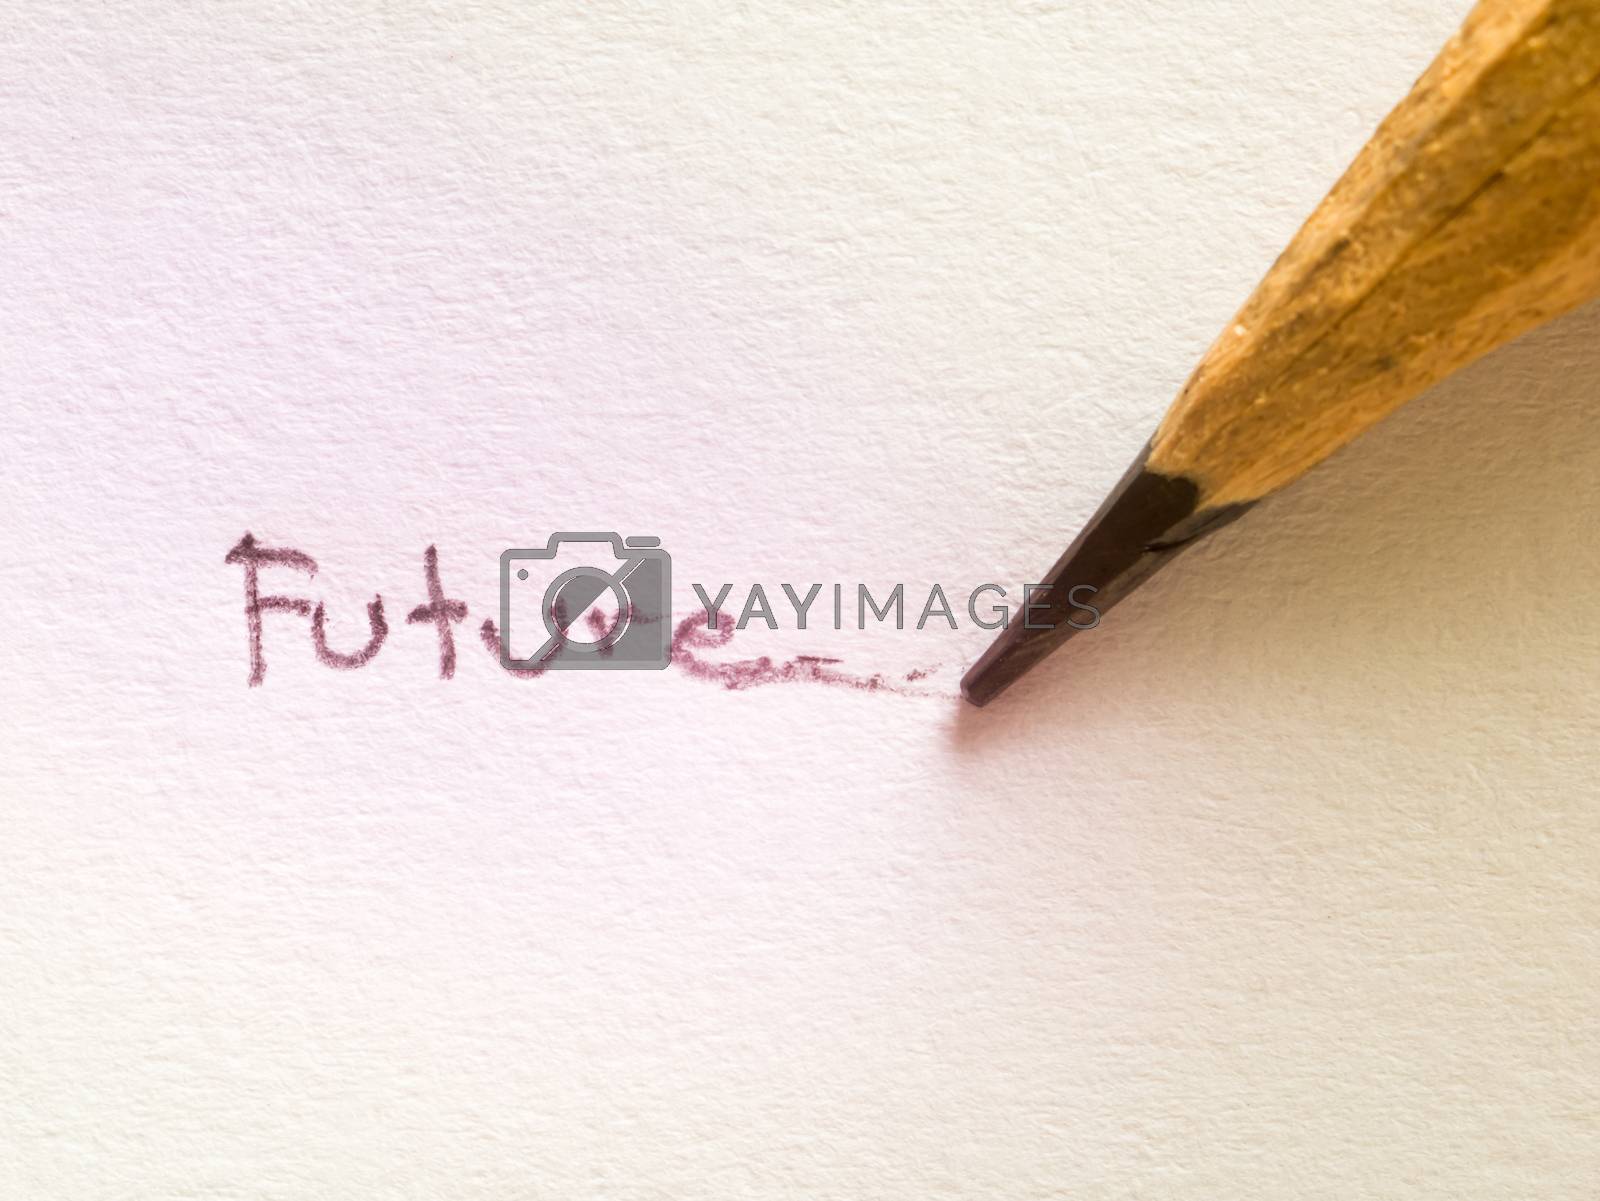 Royalty free image of Future wording on paper with pencil by hadkhanong